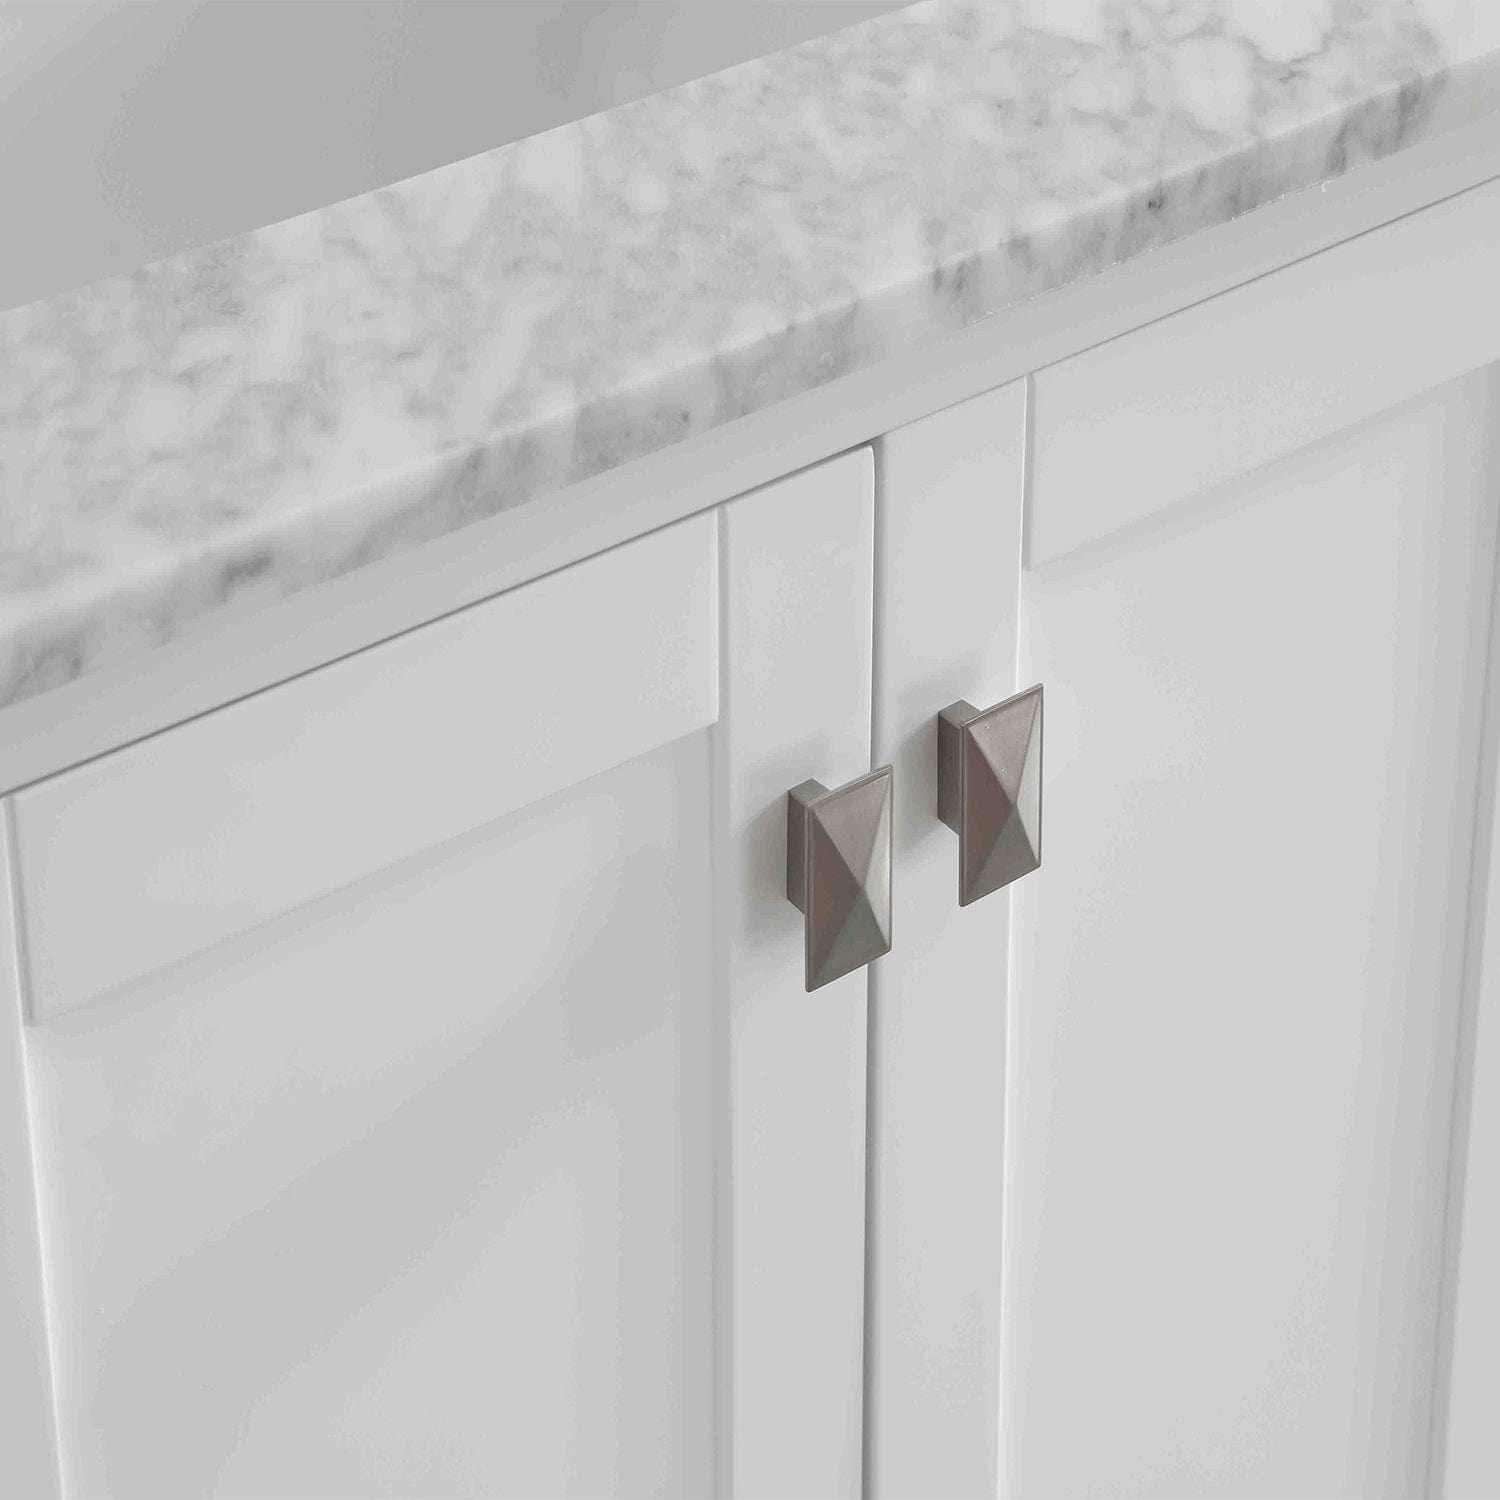 Eviva Aberdeen 78" White Transitional Double Sink Bathroom Vanity with White Carrara Top